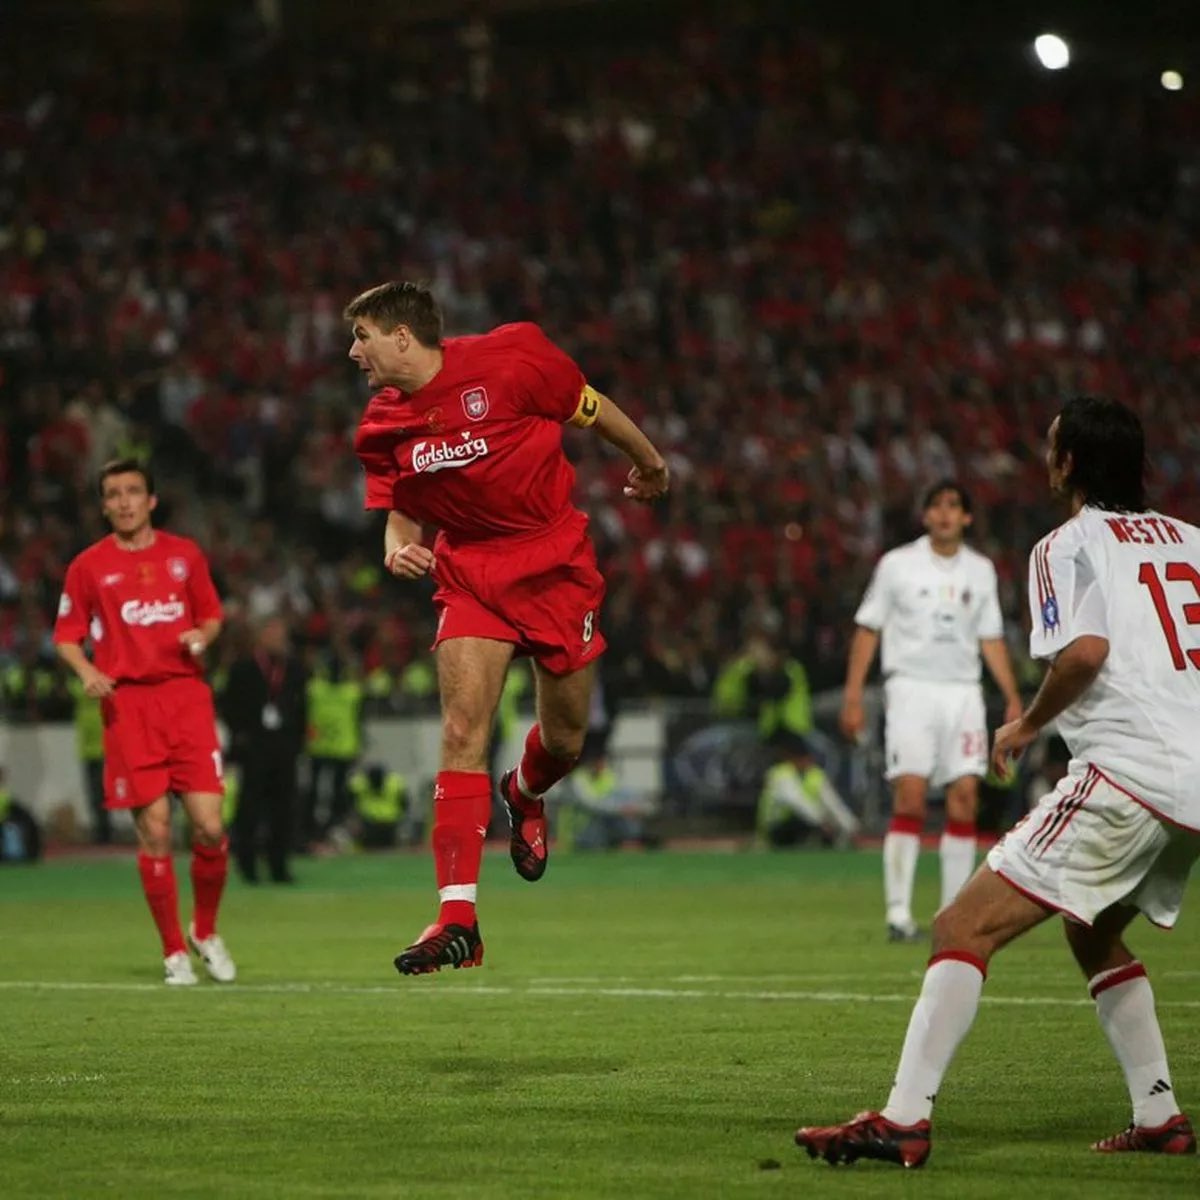 John Arne Riise cross to Steven Gerrard and the rest was history. 😮‍💨 #5